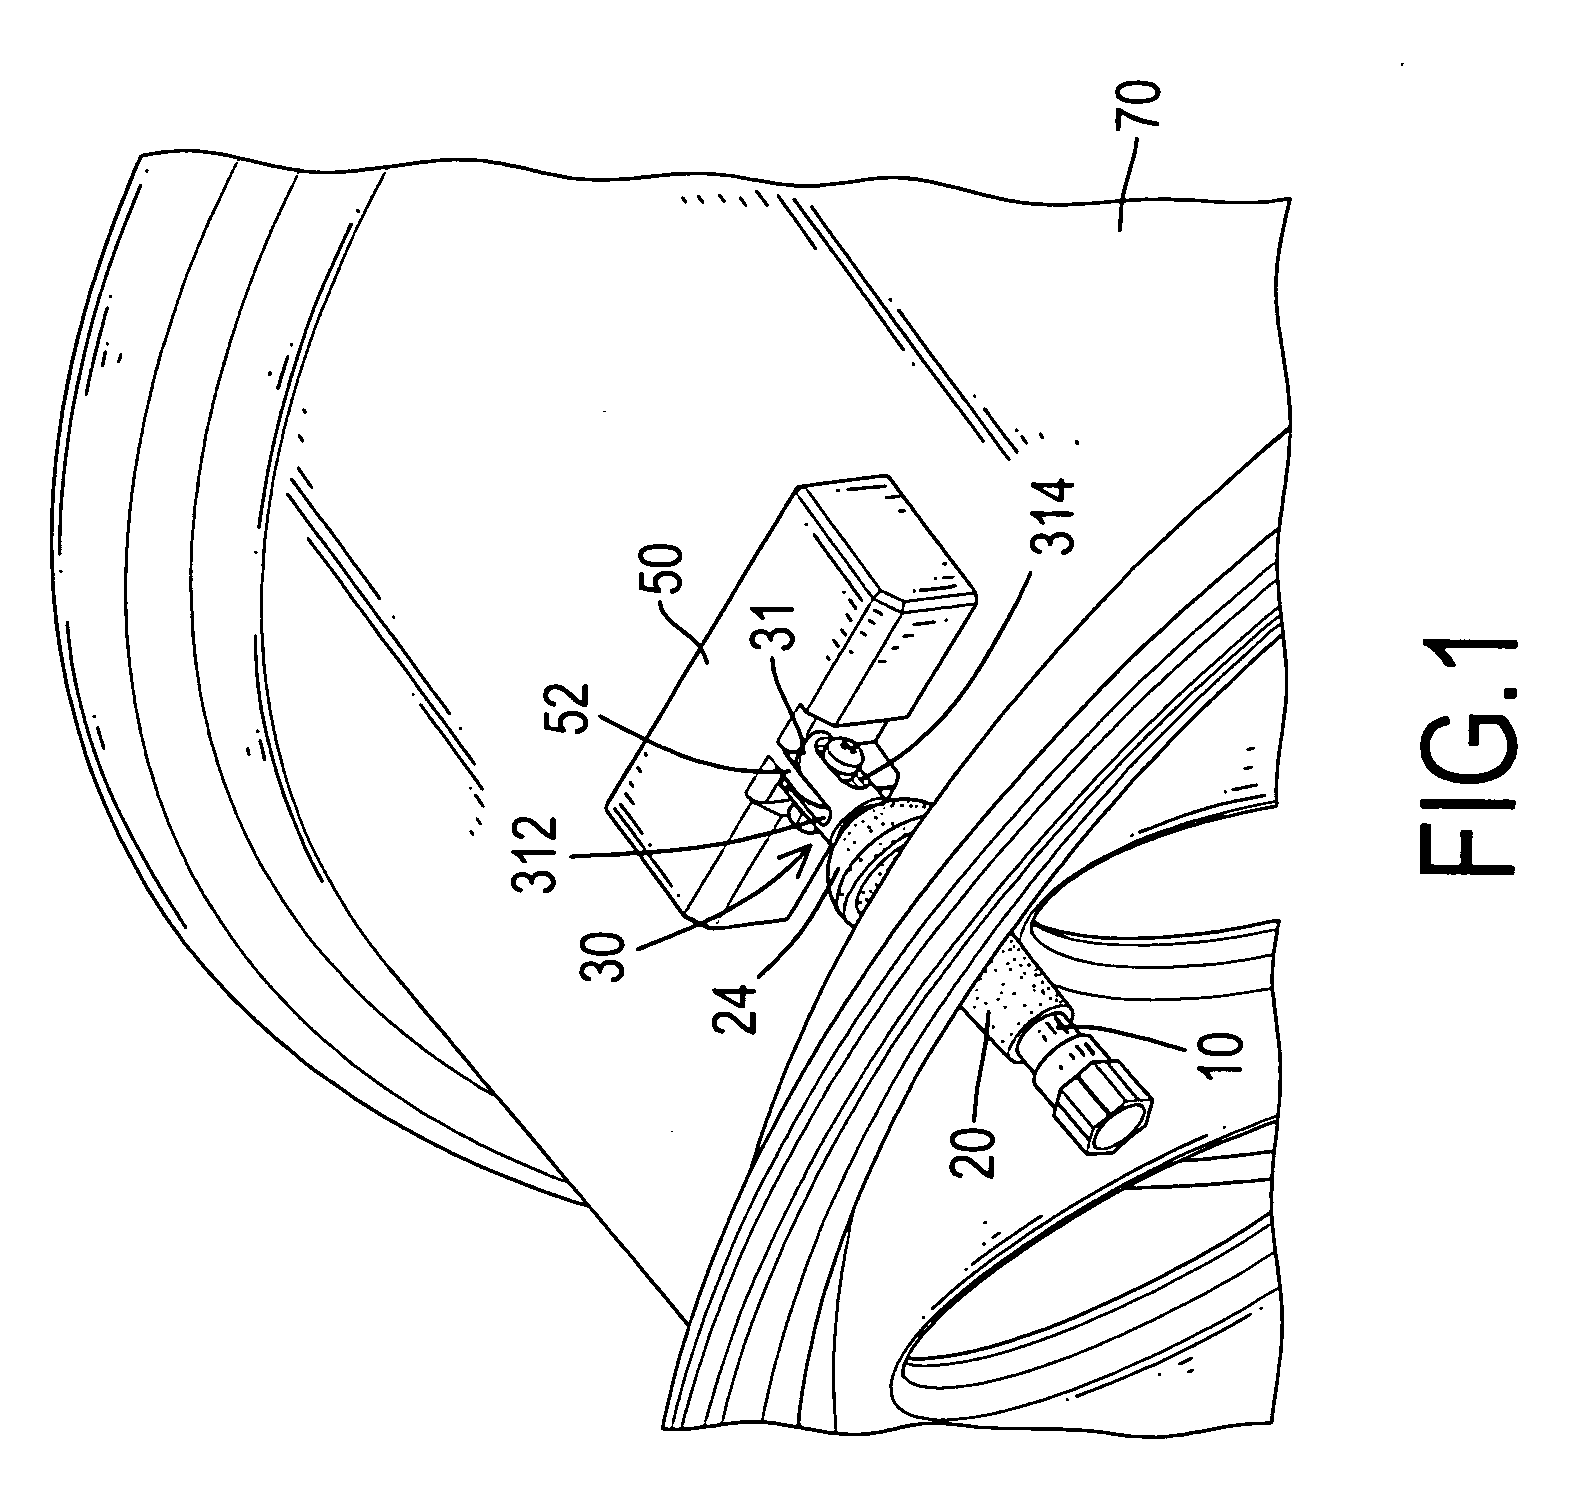 Valve stem assembly for tire pressure detecting systems